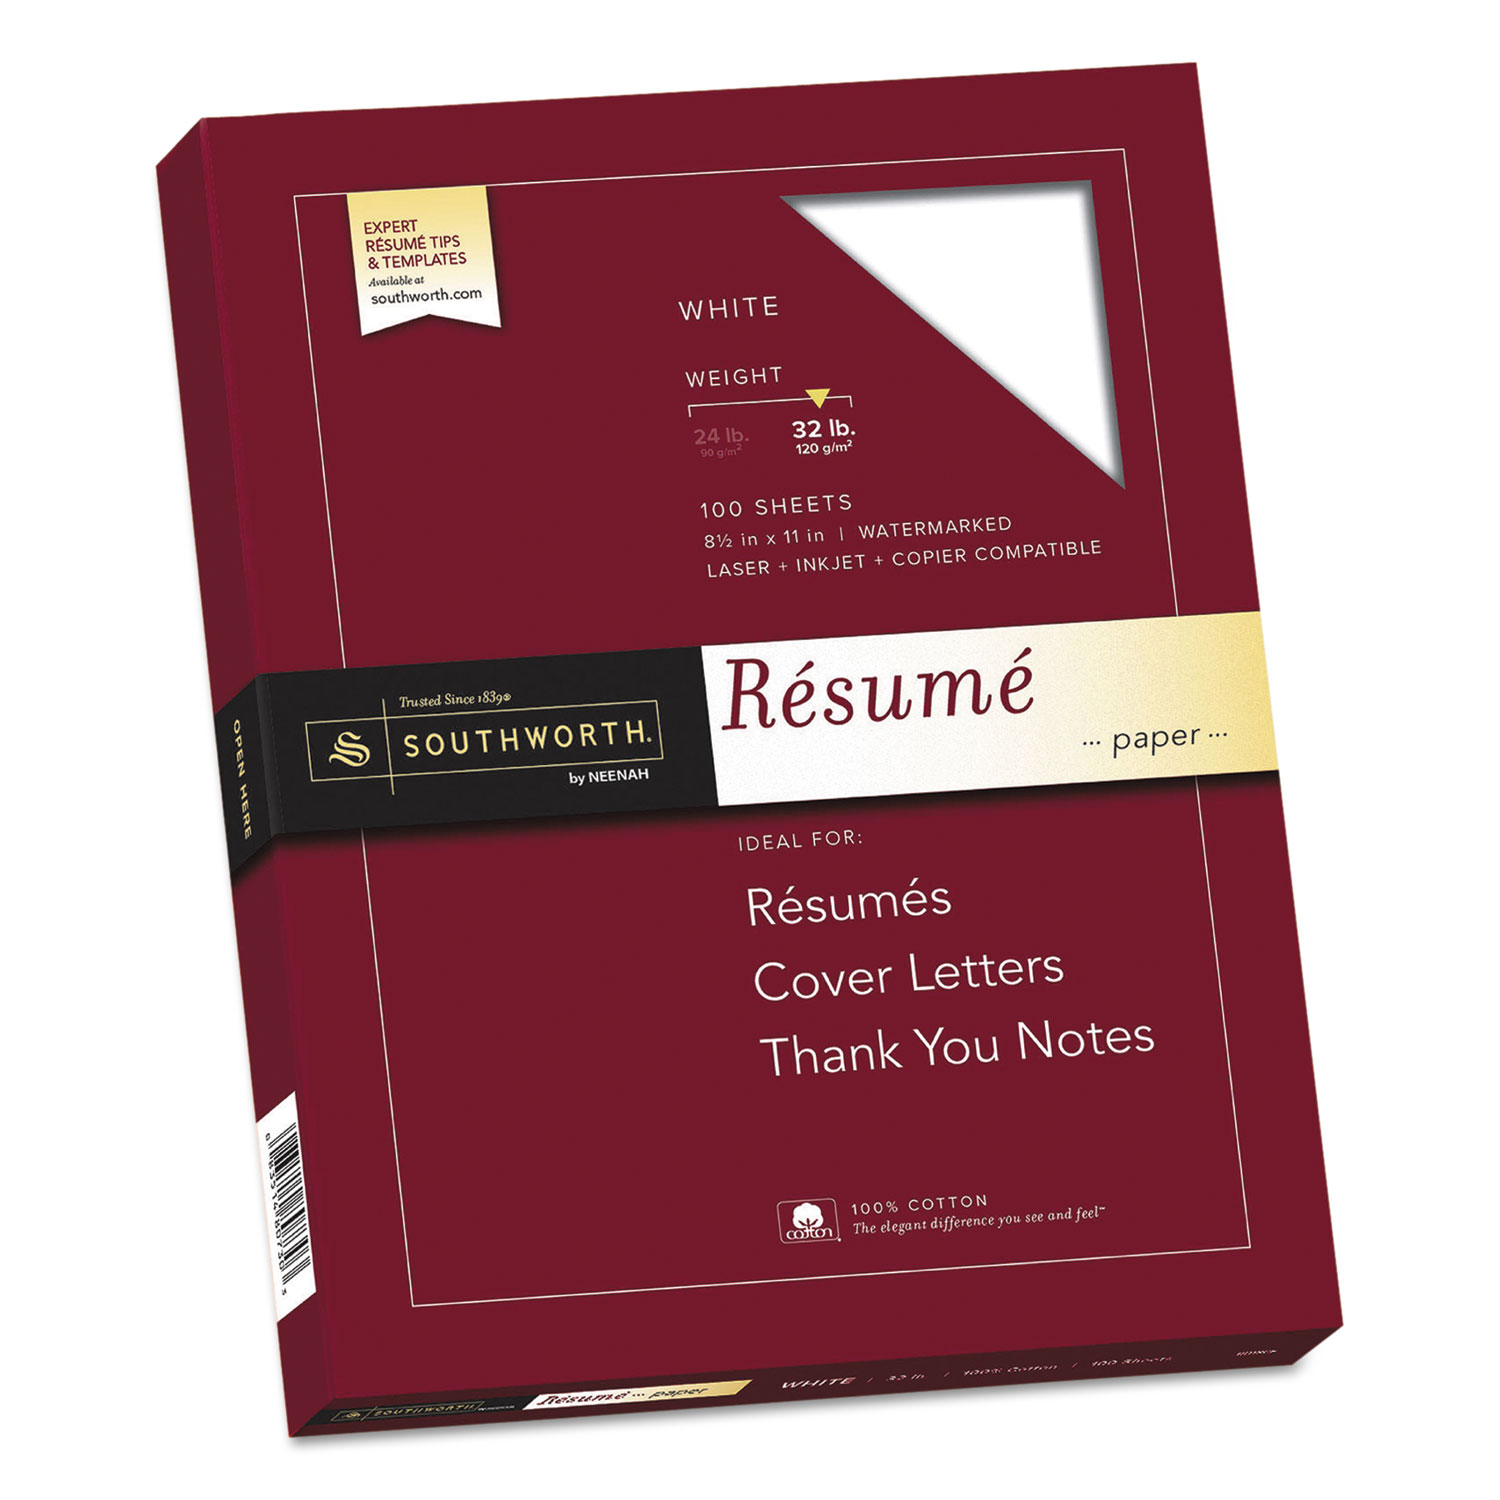 where can i buy resume paper near me